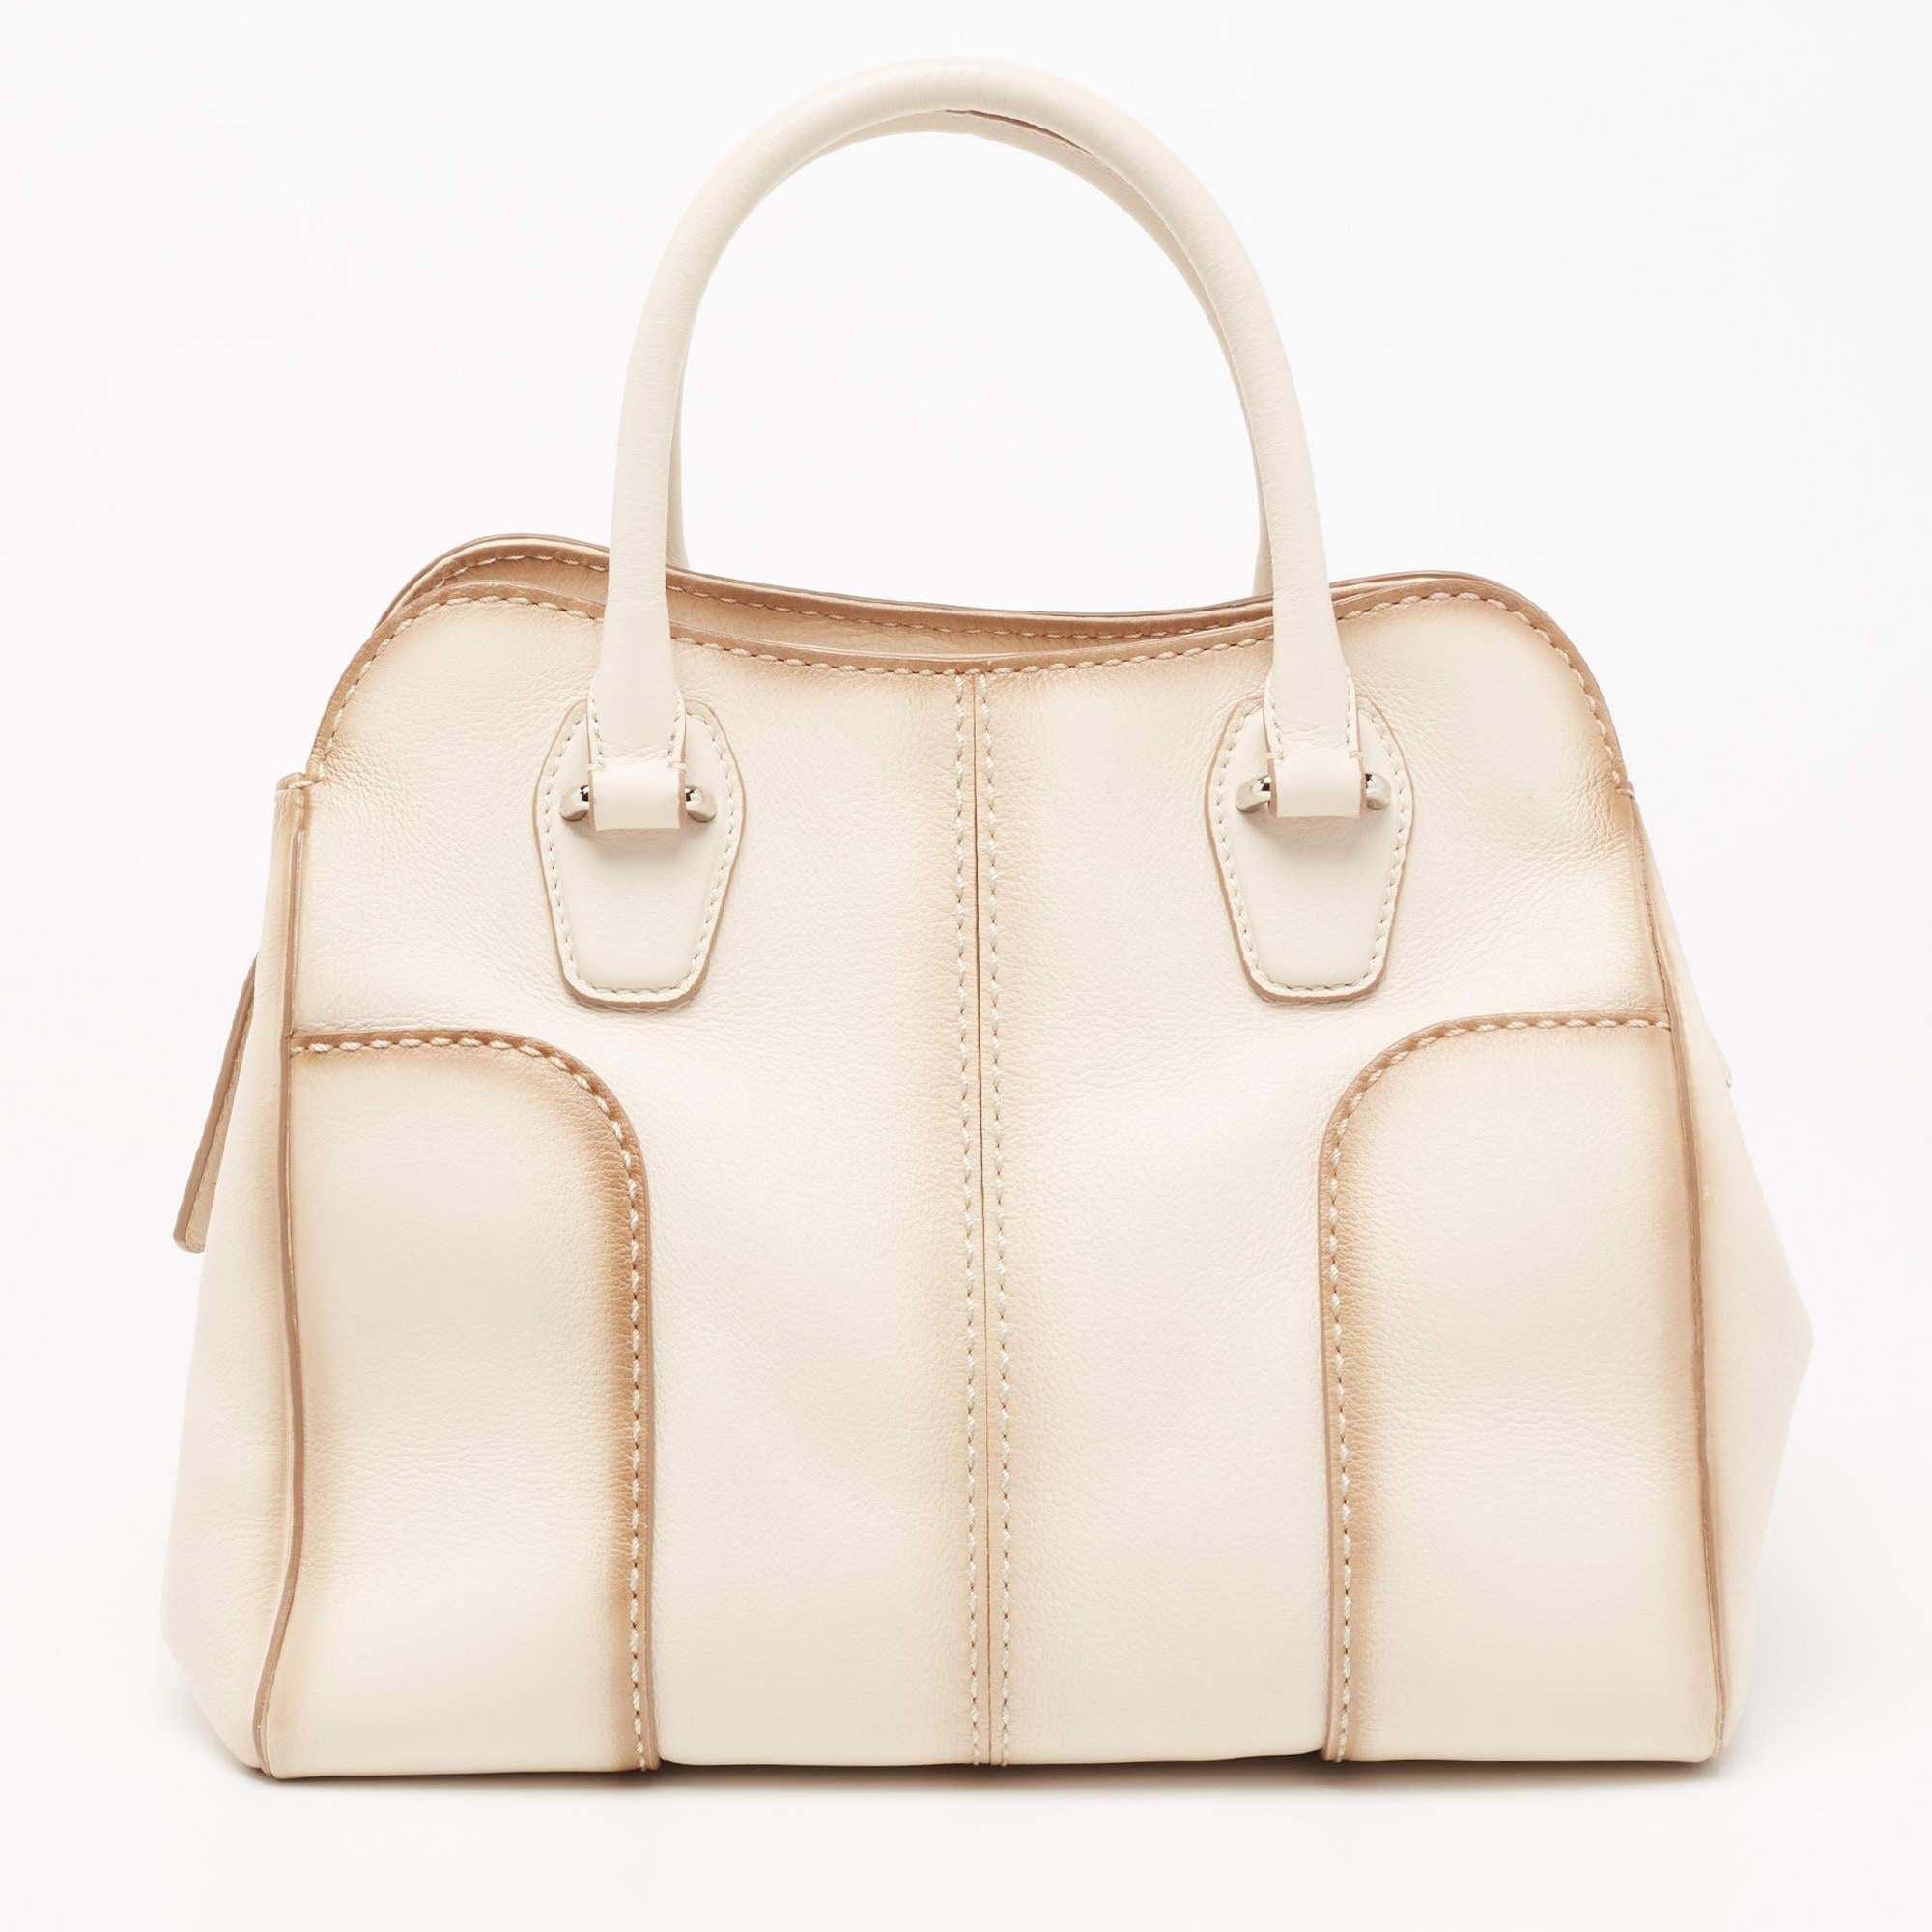 Tod's designs come with a timeless elegance where supreme quality marries with Italian flair. This tote reflects the brand's mastery in creating truly desirable and exceptional accessories. Made from leather, it is filled with functional details and